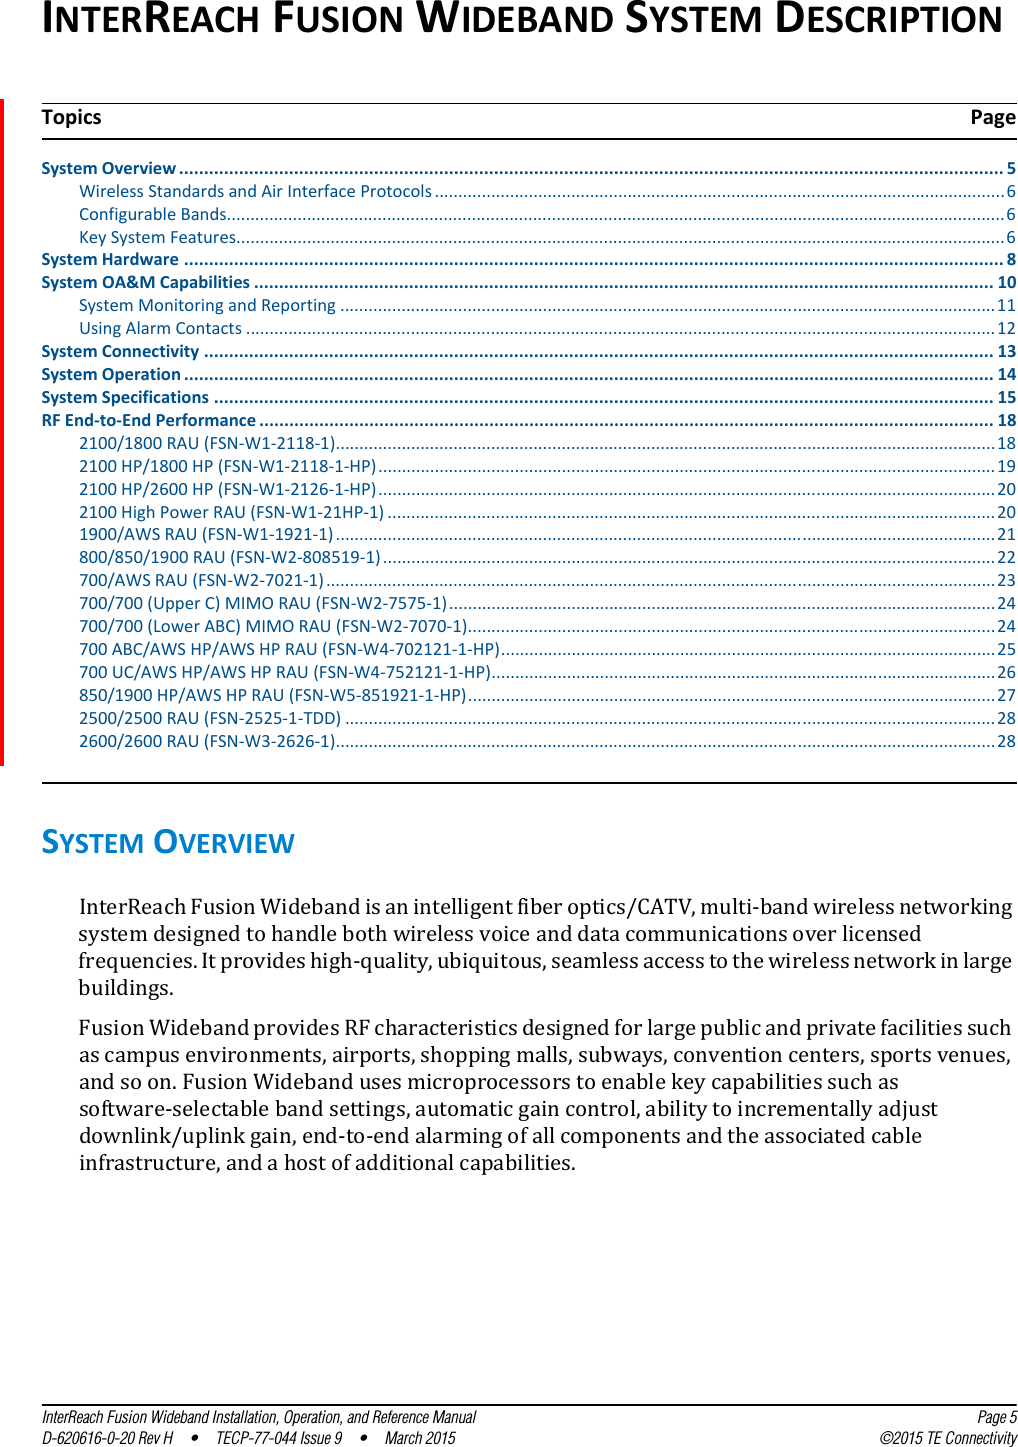 InterReach Fusion Wideband Installation, Operation, and Reference Manual Page 5D-620616-0-20 Rev H  •  TECP-77-044 Issue 9  •  March 2015 ©2015 TE ConnectivityINTERREACH FUSION WIDEBAND SYSTEM DESCRIPTIONSystem Overview ..................................................................................................................................................................... 5Wireless Standards and Air Interface Protocols.........................................................................................................................6Configurable Bands.....................................................................................................................................................................6Key System Features...................................................................................................................................................................6System Hardware .................................................................................................................................................................... 8System OA&amp;M Capabilities .................................................................................................................................................... 10System Monitoring and Reporting ...........................................................................................................................................11Using Alarm Contacts ...............................................................................................................................................................12System Connectivity .............................................................................................................................................................. 13System Operation .................................................................................................................................................................. 14System Specifications ............................................................................................................................................................ 15RF End-to-End Performance ................................................................................................................................................... 182100/1800 RAU (FSN-W1-2118-1)............................................................................................................................................182100 HP/1800 HP (FSN-W1-2118-1-HP)...................................................................................................................................192100 HP/2600 HP (FSN-W1-2126-1-HP)...................................................................................................................................202100 High Power RAU (FSN-W1-21HP-1) .................................................................................................................................201900/AWS RAU (FSN-W1-1921-1)............................................................................................................................................21800/850/1900 RAU (FSN-W2-808519-1)..................................................................................................................................22700/AWS RAU (FSN-W2-7021-1) ..............................................................................................................................................23700/700 (Upper C) MIMO RAU (FSN-W2-7575-1)....................................................................................................................24700/700 (Lower ABC) MIMO RAU (FSN-W2-7070-1)................................................................................................................24700 ABC/AWS HP/AWS HP RAU (FSN-W4-702121-1-HP).........................................................................................................25700 UC/AWS HP/AWS HP RAU (FSN-W4-752121-1-HP)...........................................................................................................26850/1900 HP/AWS HP RAU (FSN-W5-851921-1-HP)................................................................................................................272500/2500 RAU (FSN-2525-1-TDD) ..........................................................................................................................................282600/2600 RAU (FSN-W3-2626-1)............................................................................................................................................28SYSTEM OVERVIEWInterReach Fusion Wideband is an intelligent fiber optics/CATV, multi-band wireless networking system designed to handle both wireless voice and data communications over licensed frequencies. It provides high-quality, ubiquitous, seamless access to the wireless network in large buildings.Fusion Wideband provides RF characteristics designed for large public and private facilities such as campus environments, airports, shopping malls, subways, convention centers, sports venues, and so on. Fusion Wideband uses microprocessors to enable key capabilities such as software-selectable band settings, automatic gain control, ability to incrementally adjust downlink/uplink gain, end-to-end alarming of all components and the associated cable infrastructure, and a host of additional capabilities.Topics Page